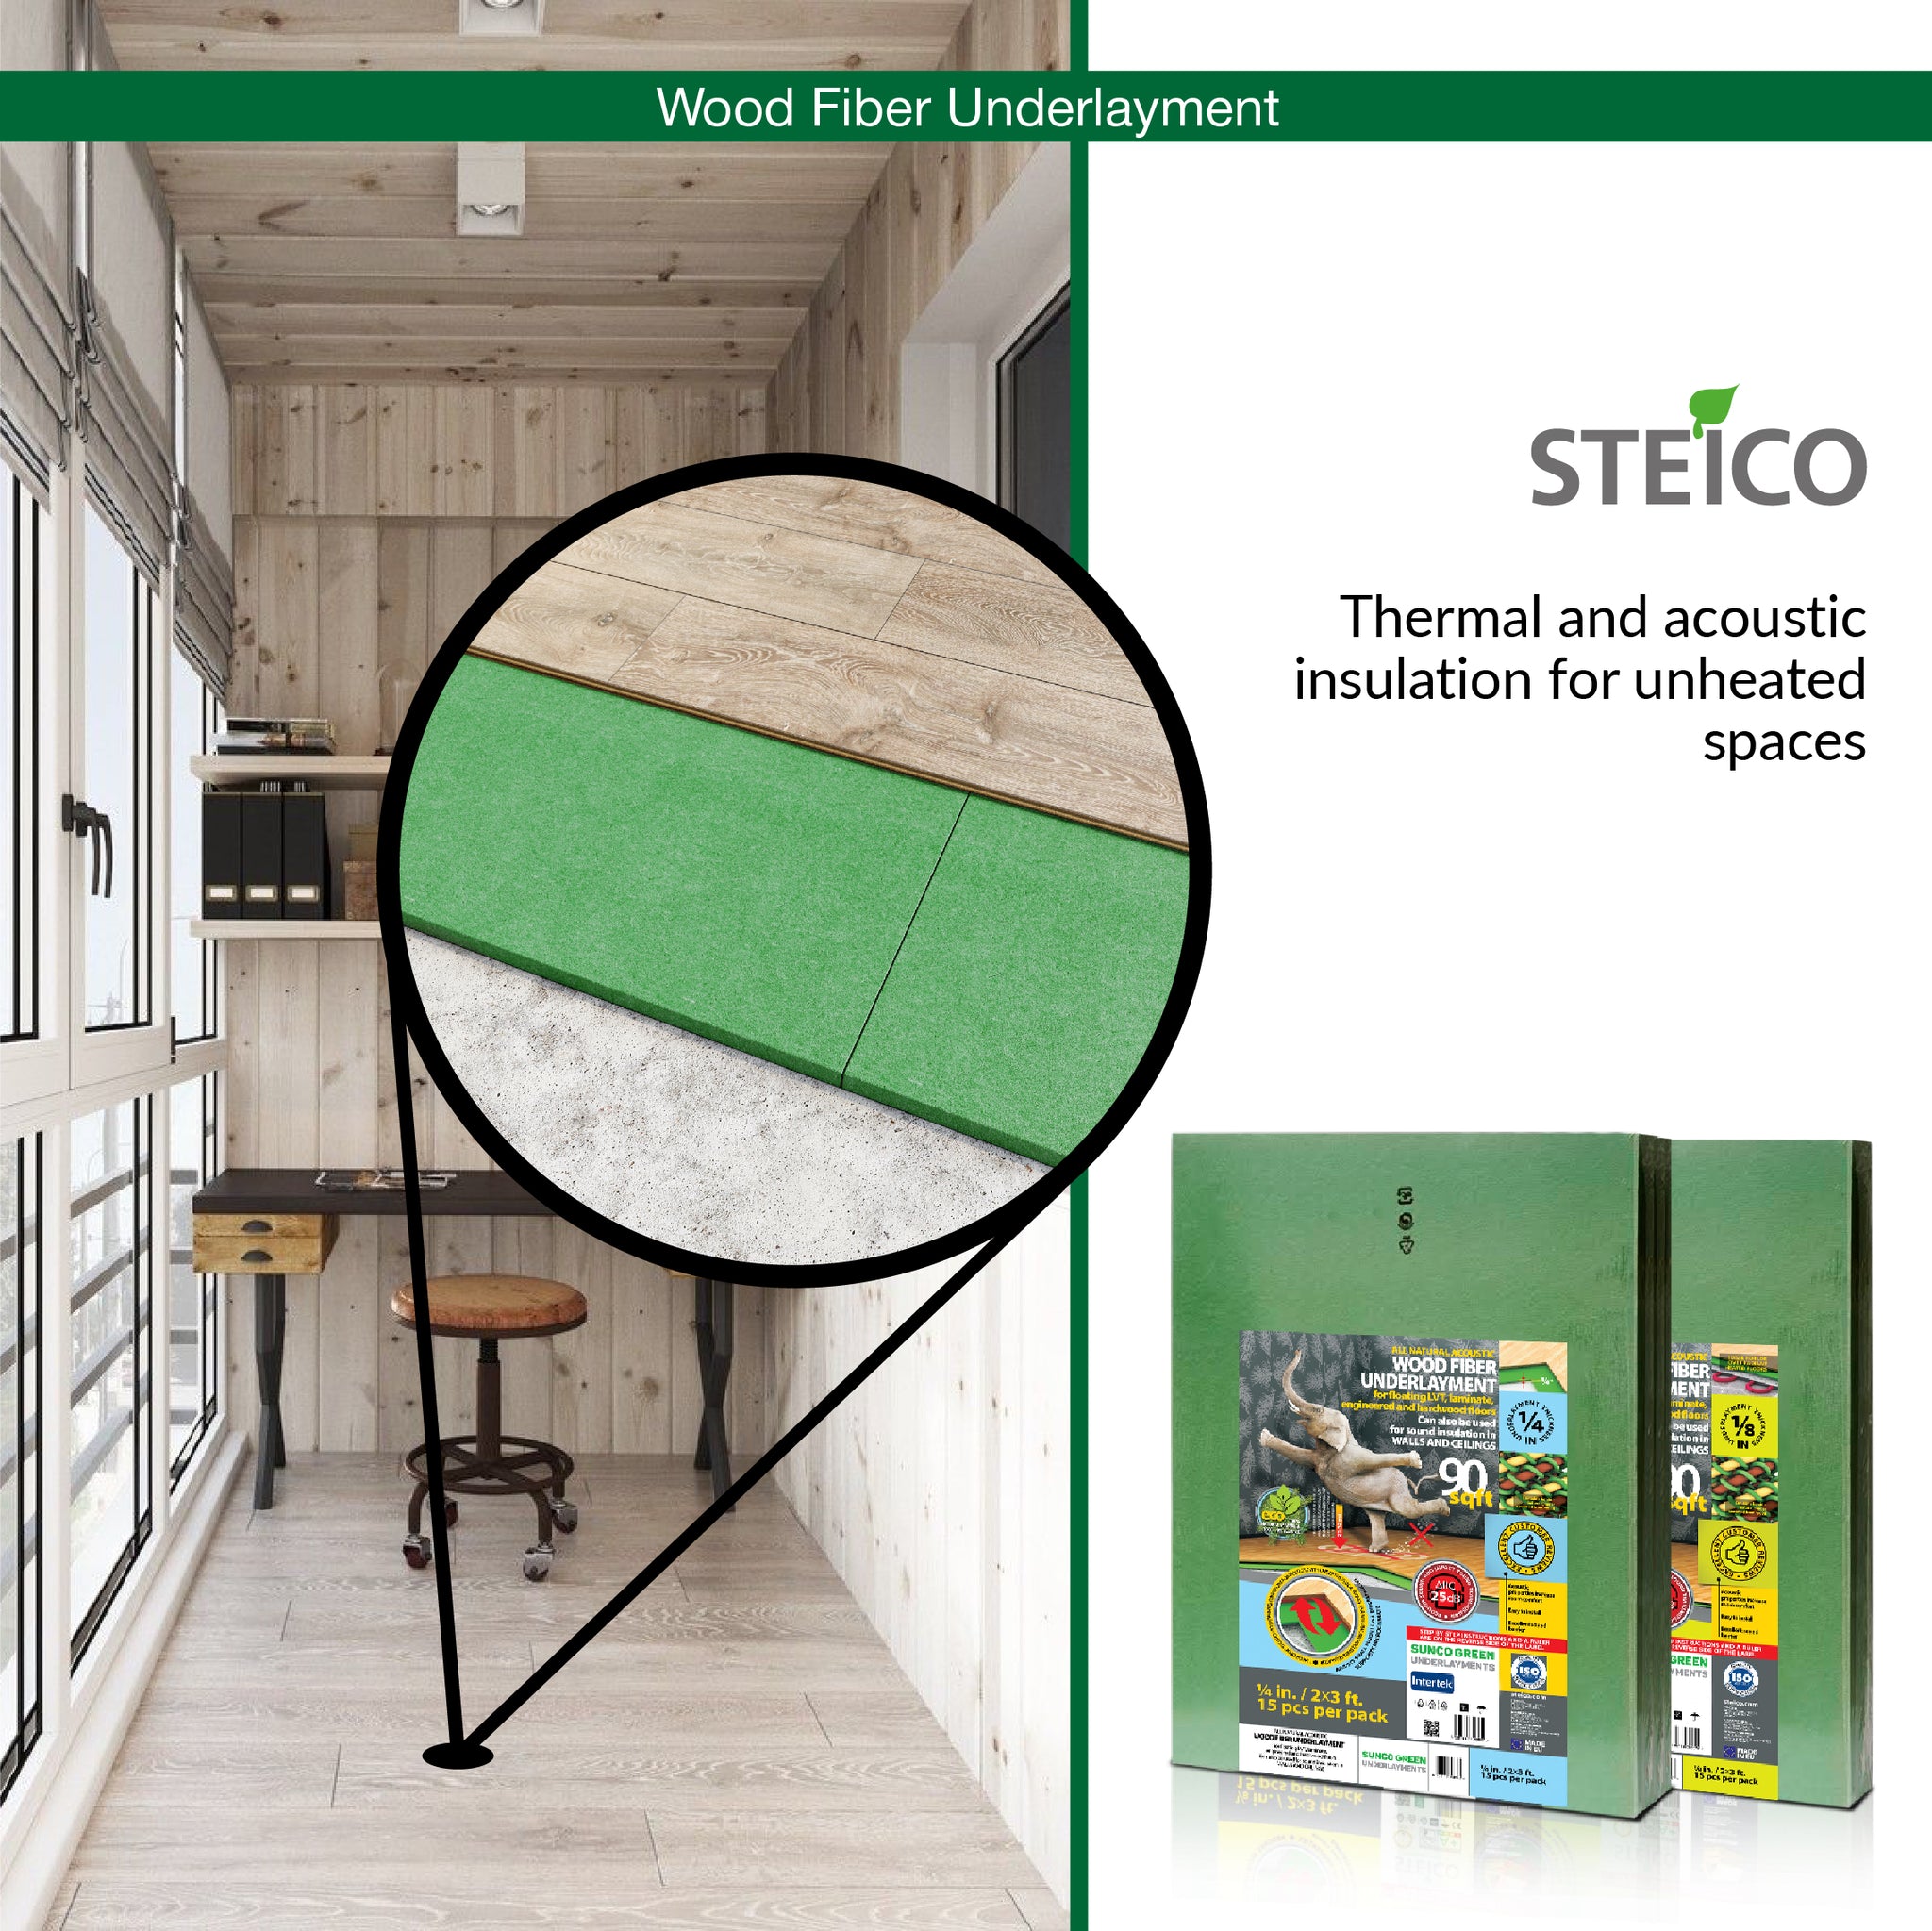 Steico Thermal and Acoustic Insulation